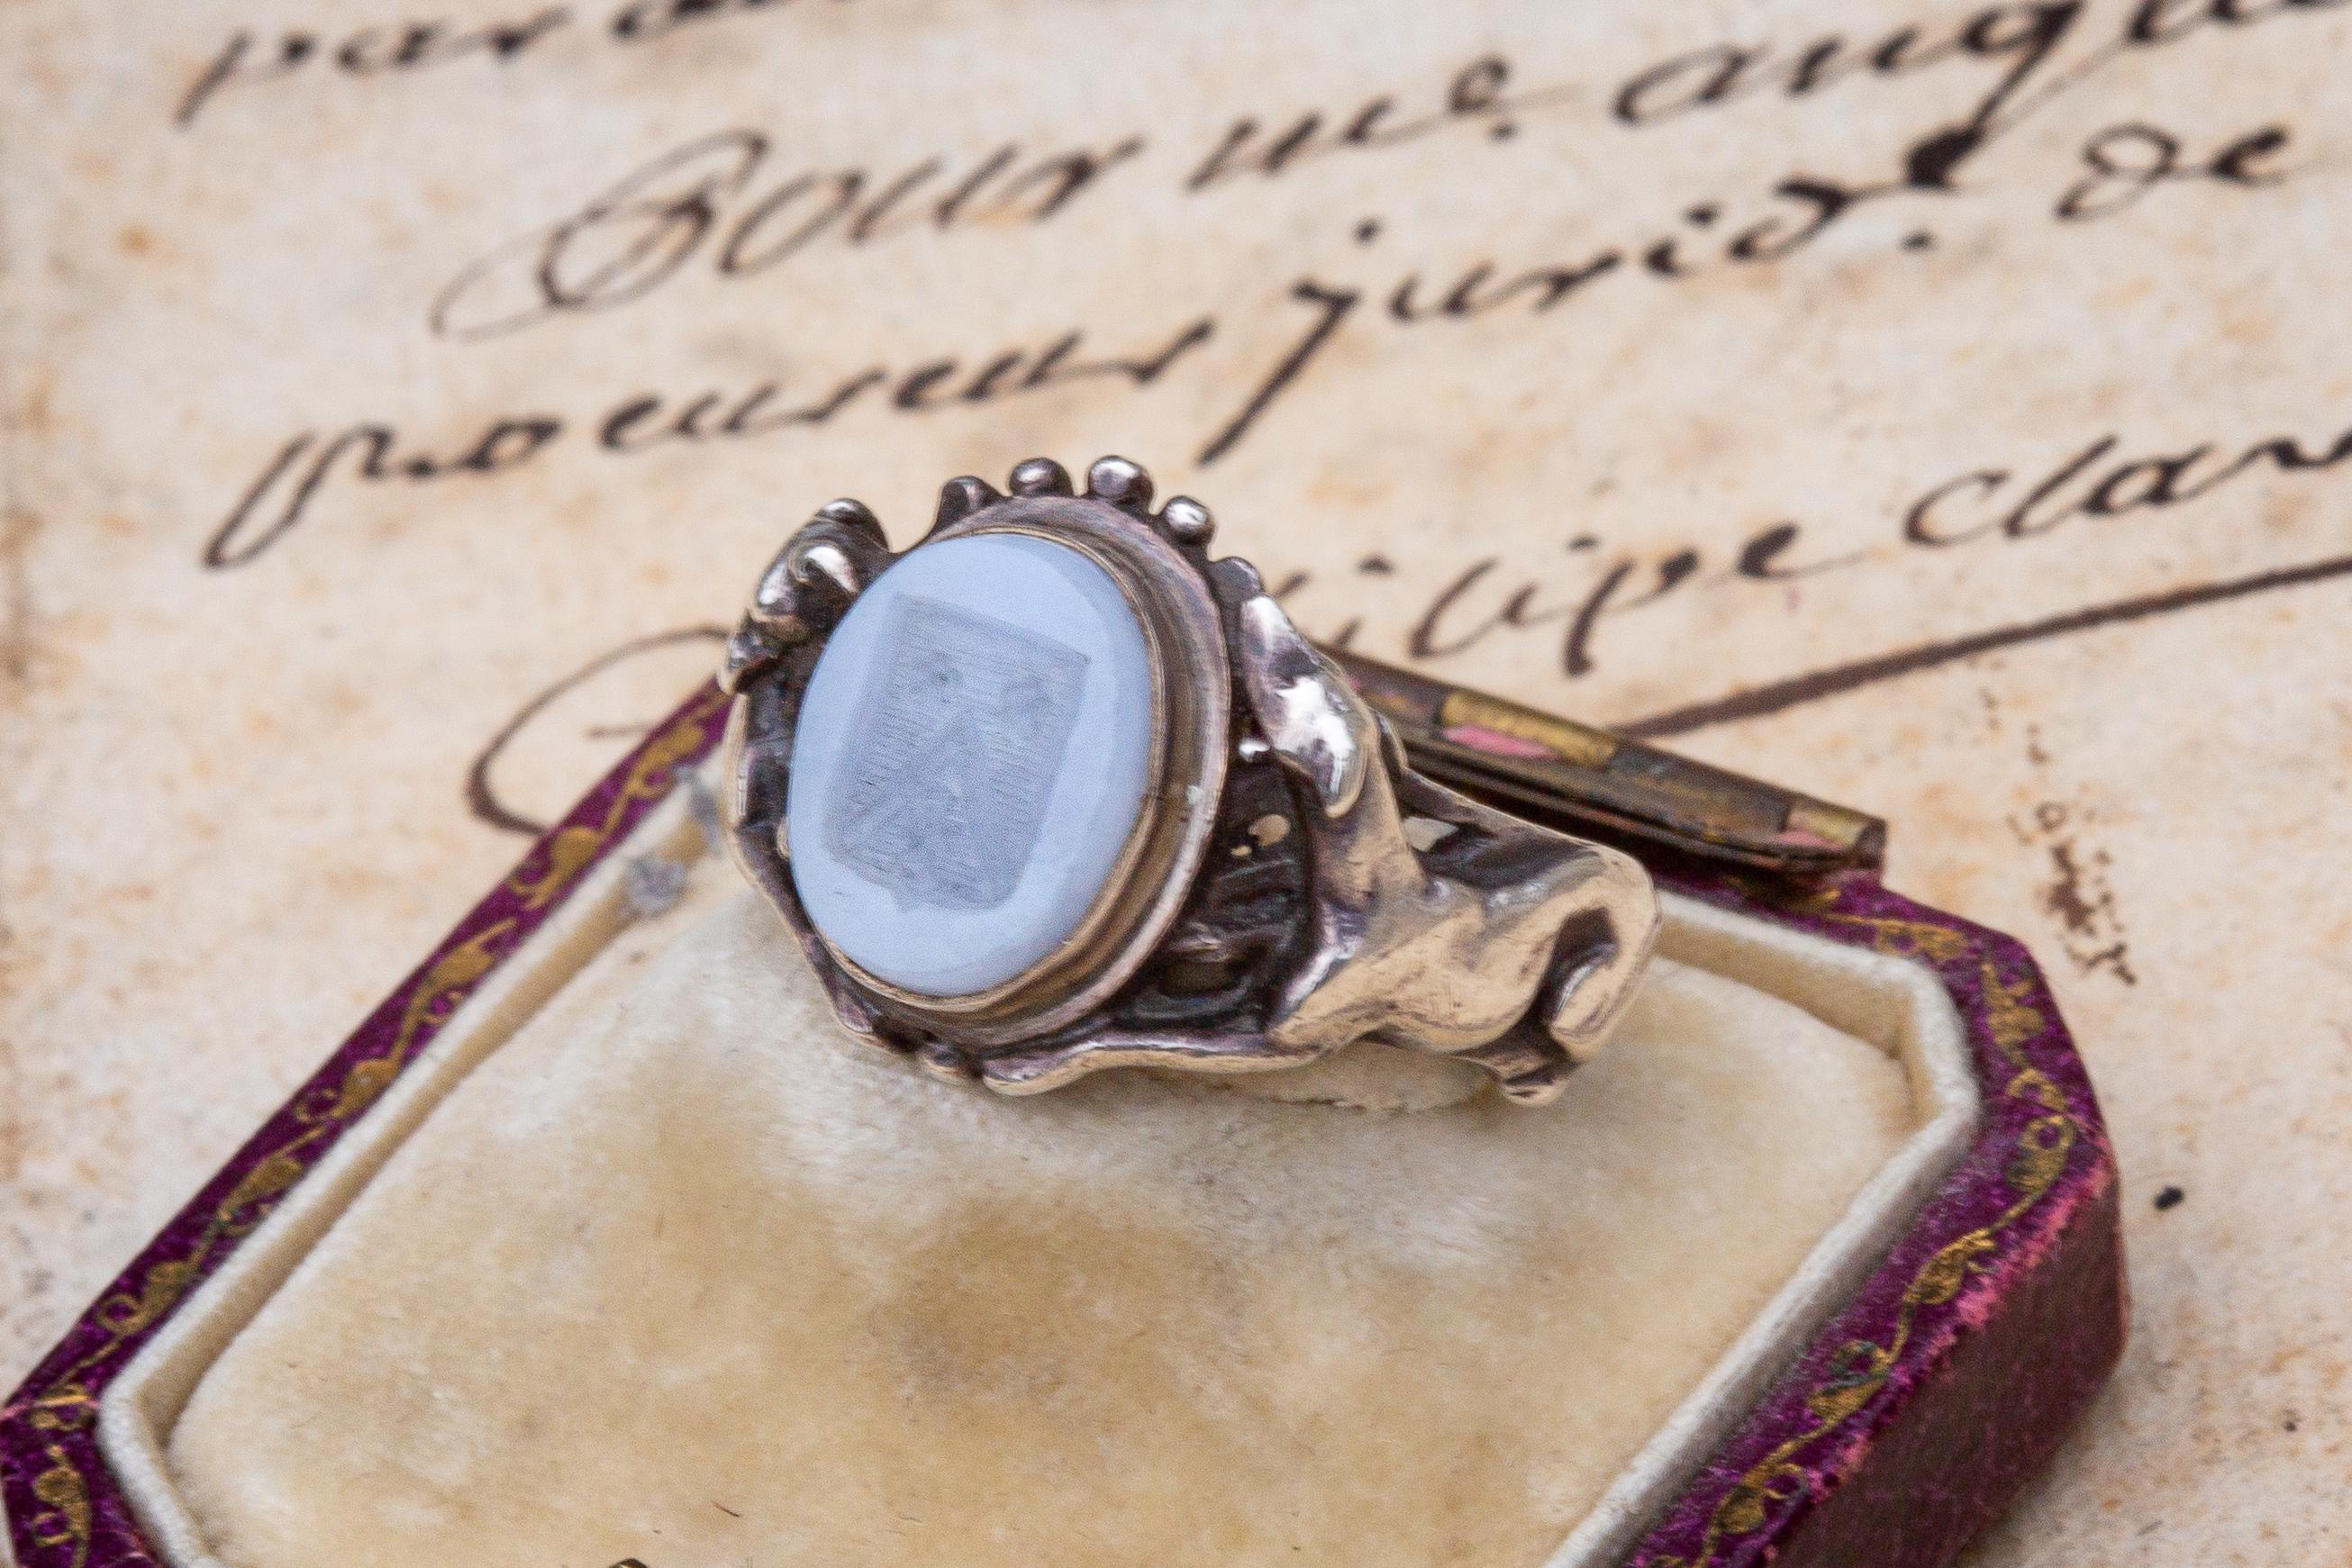 French Neo-Renaissance Intaglio Signet Ring Manner of Wièse & Froment-Meurice For Sale 2